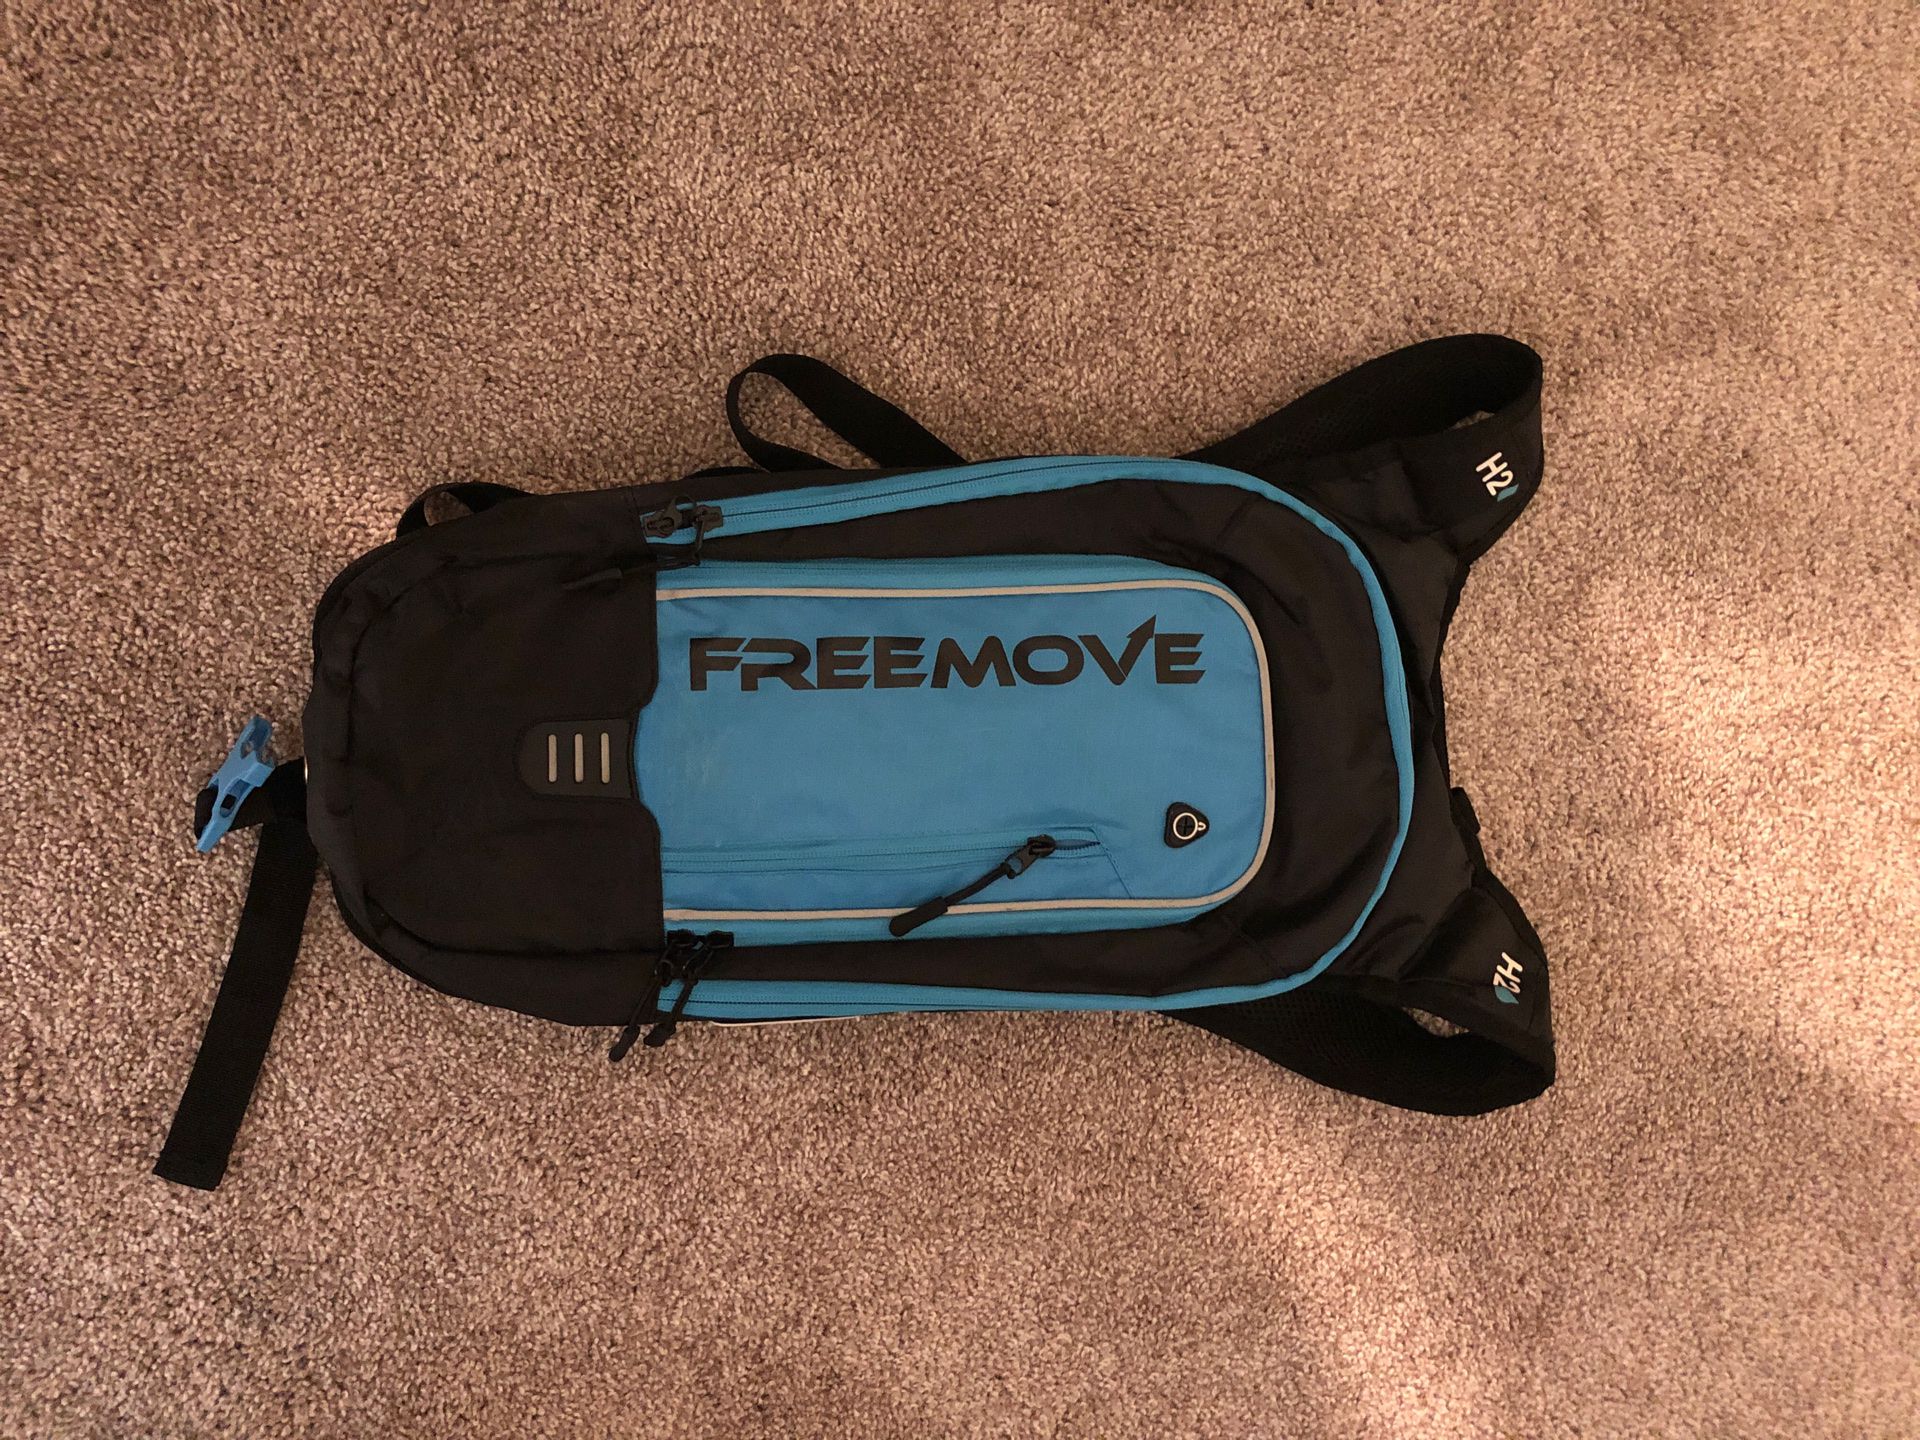 Freemove hydration backpack